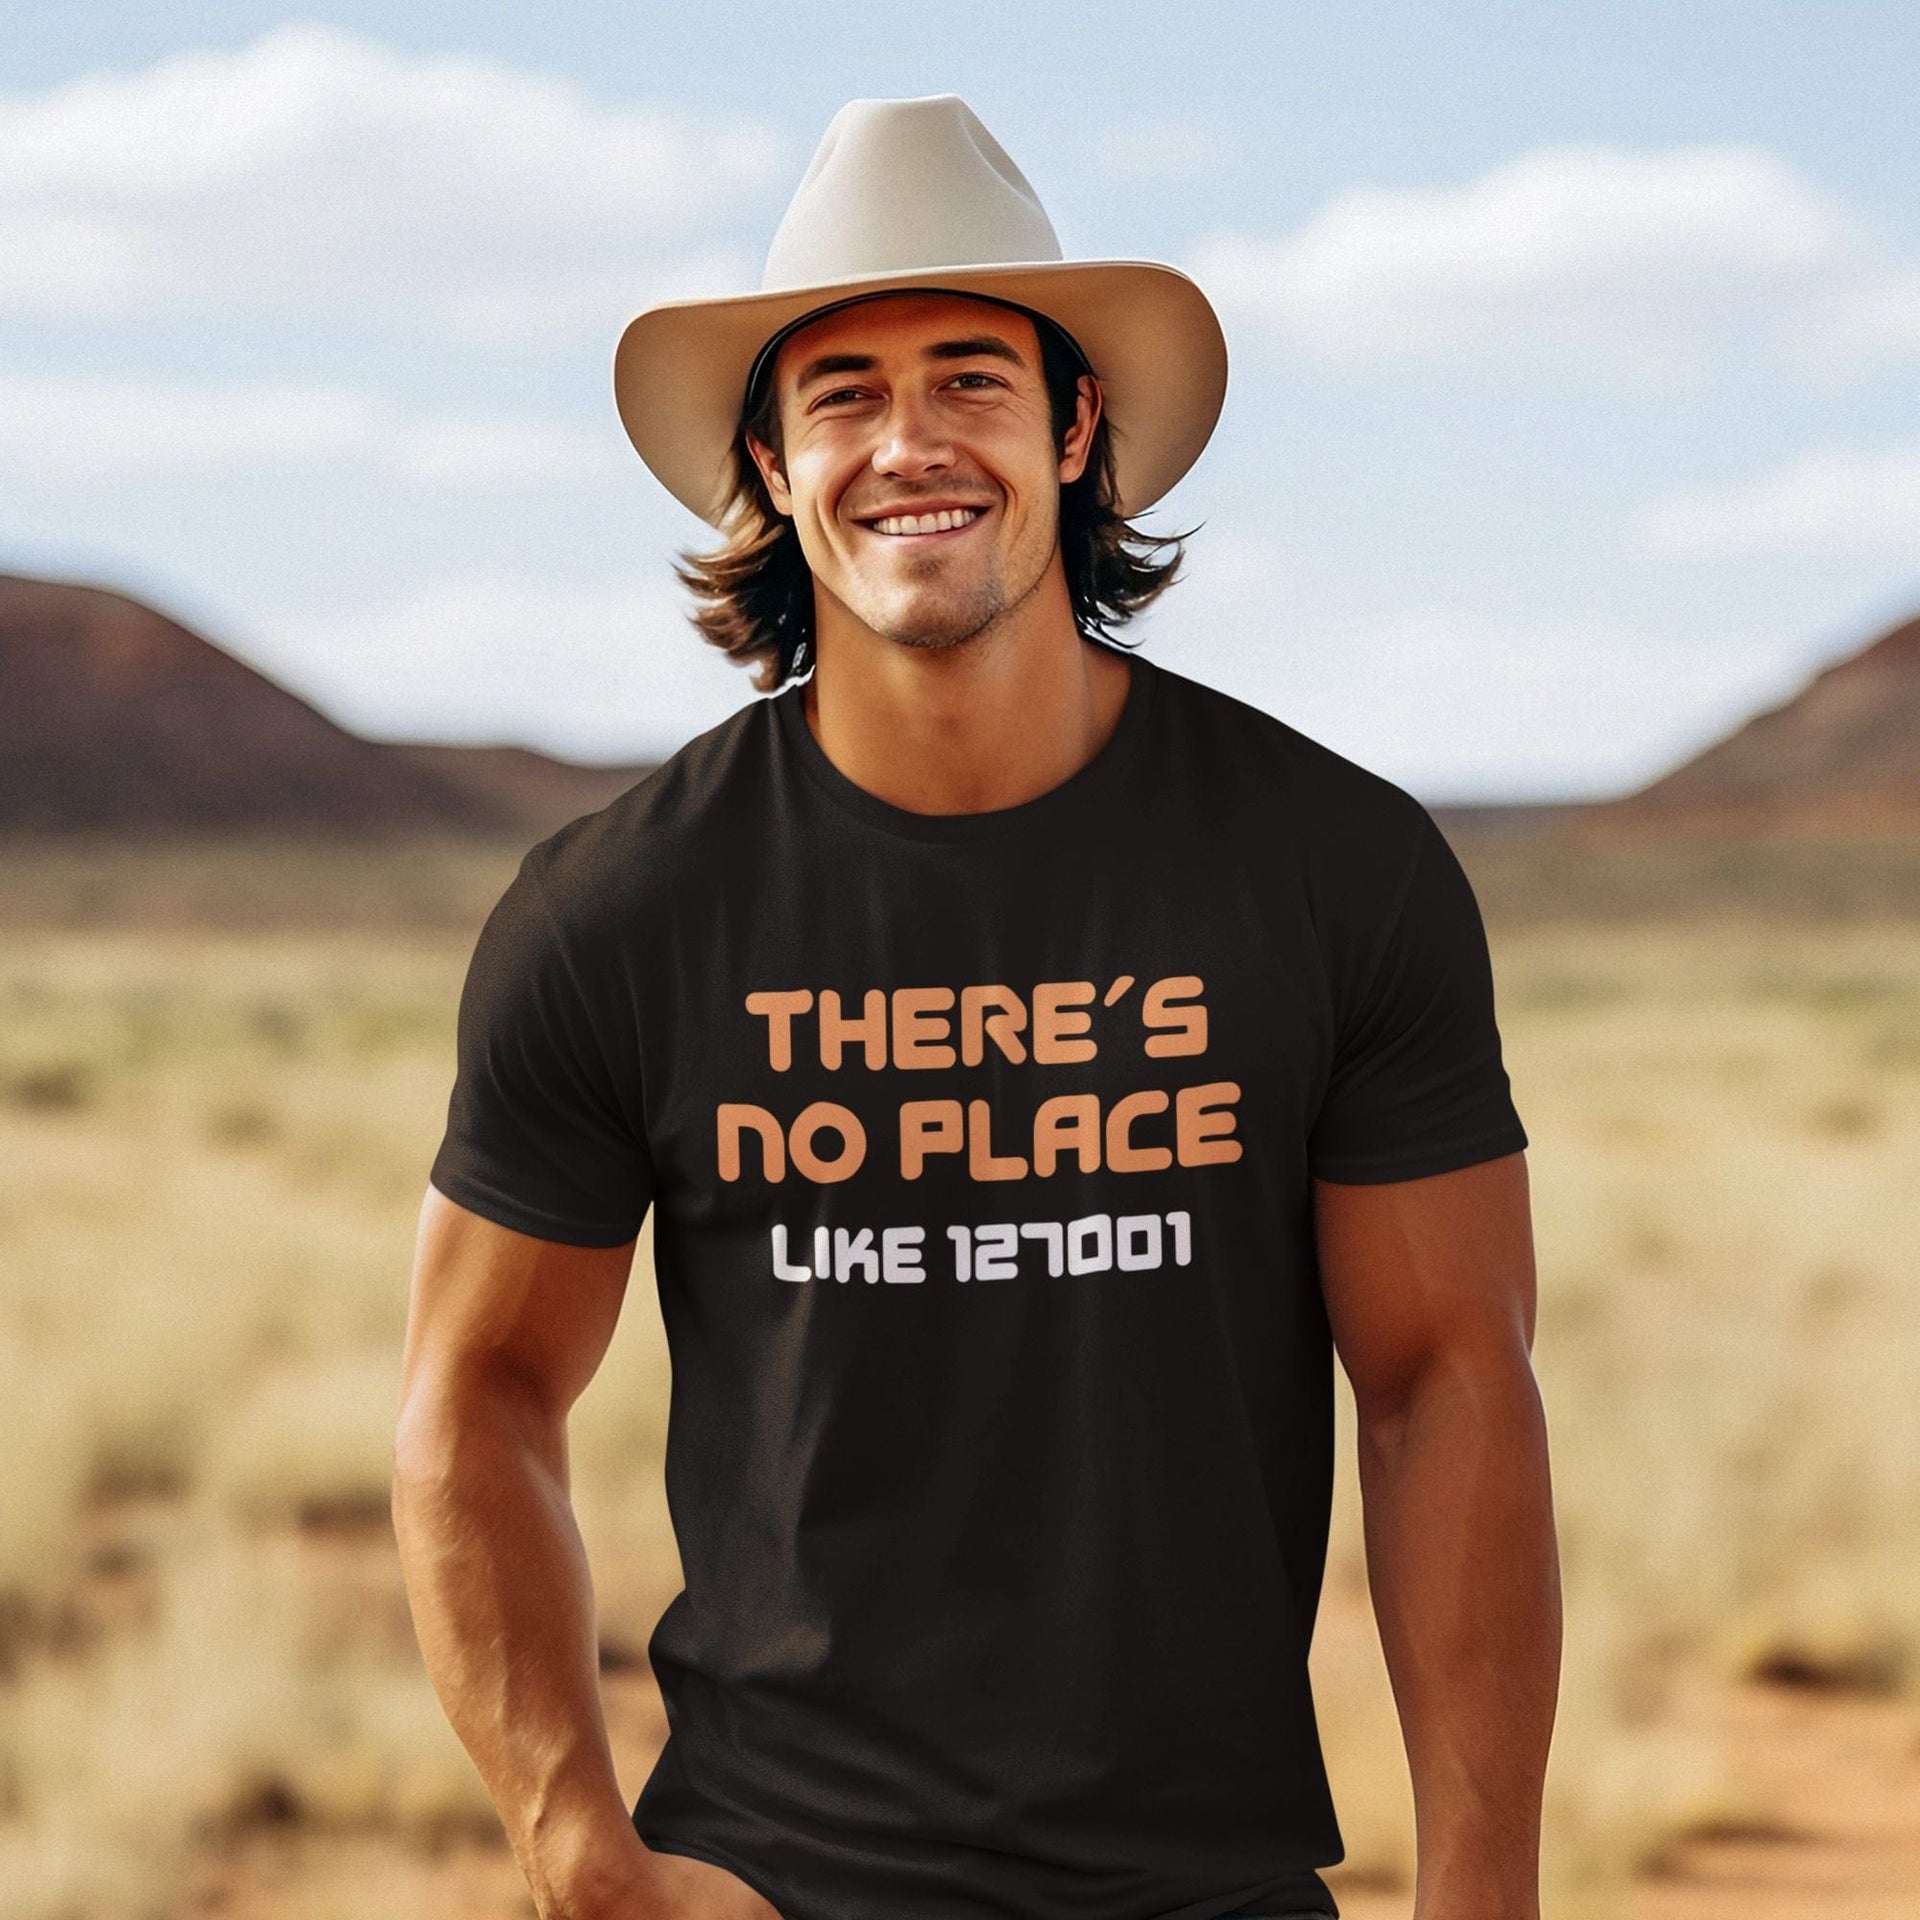 There's No Place Like 127001 - Men's T-Shirt